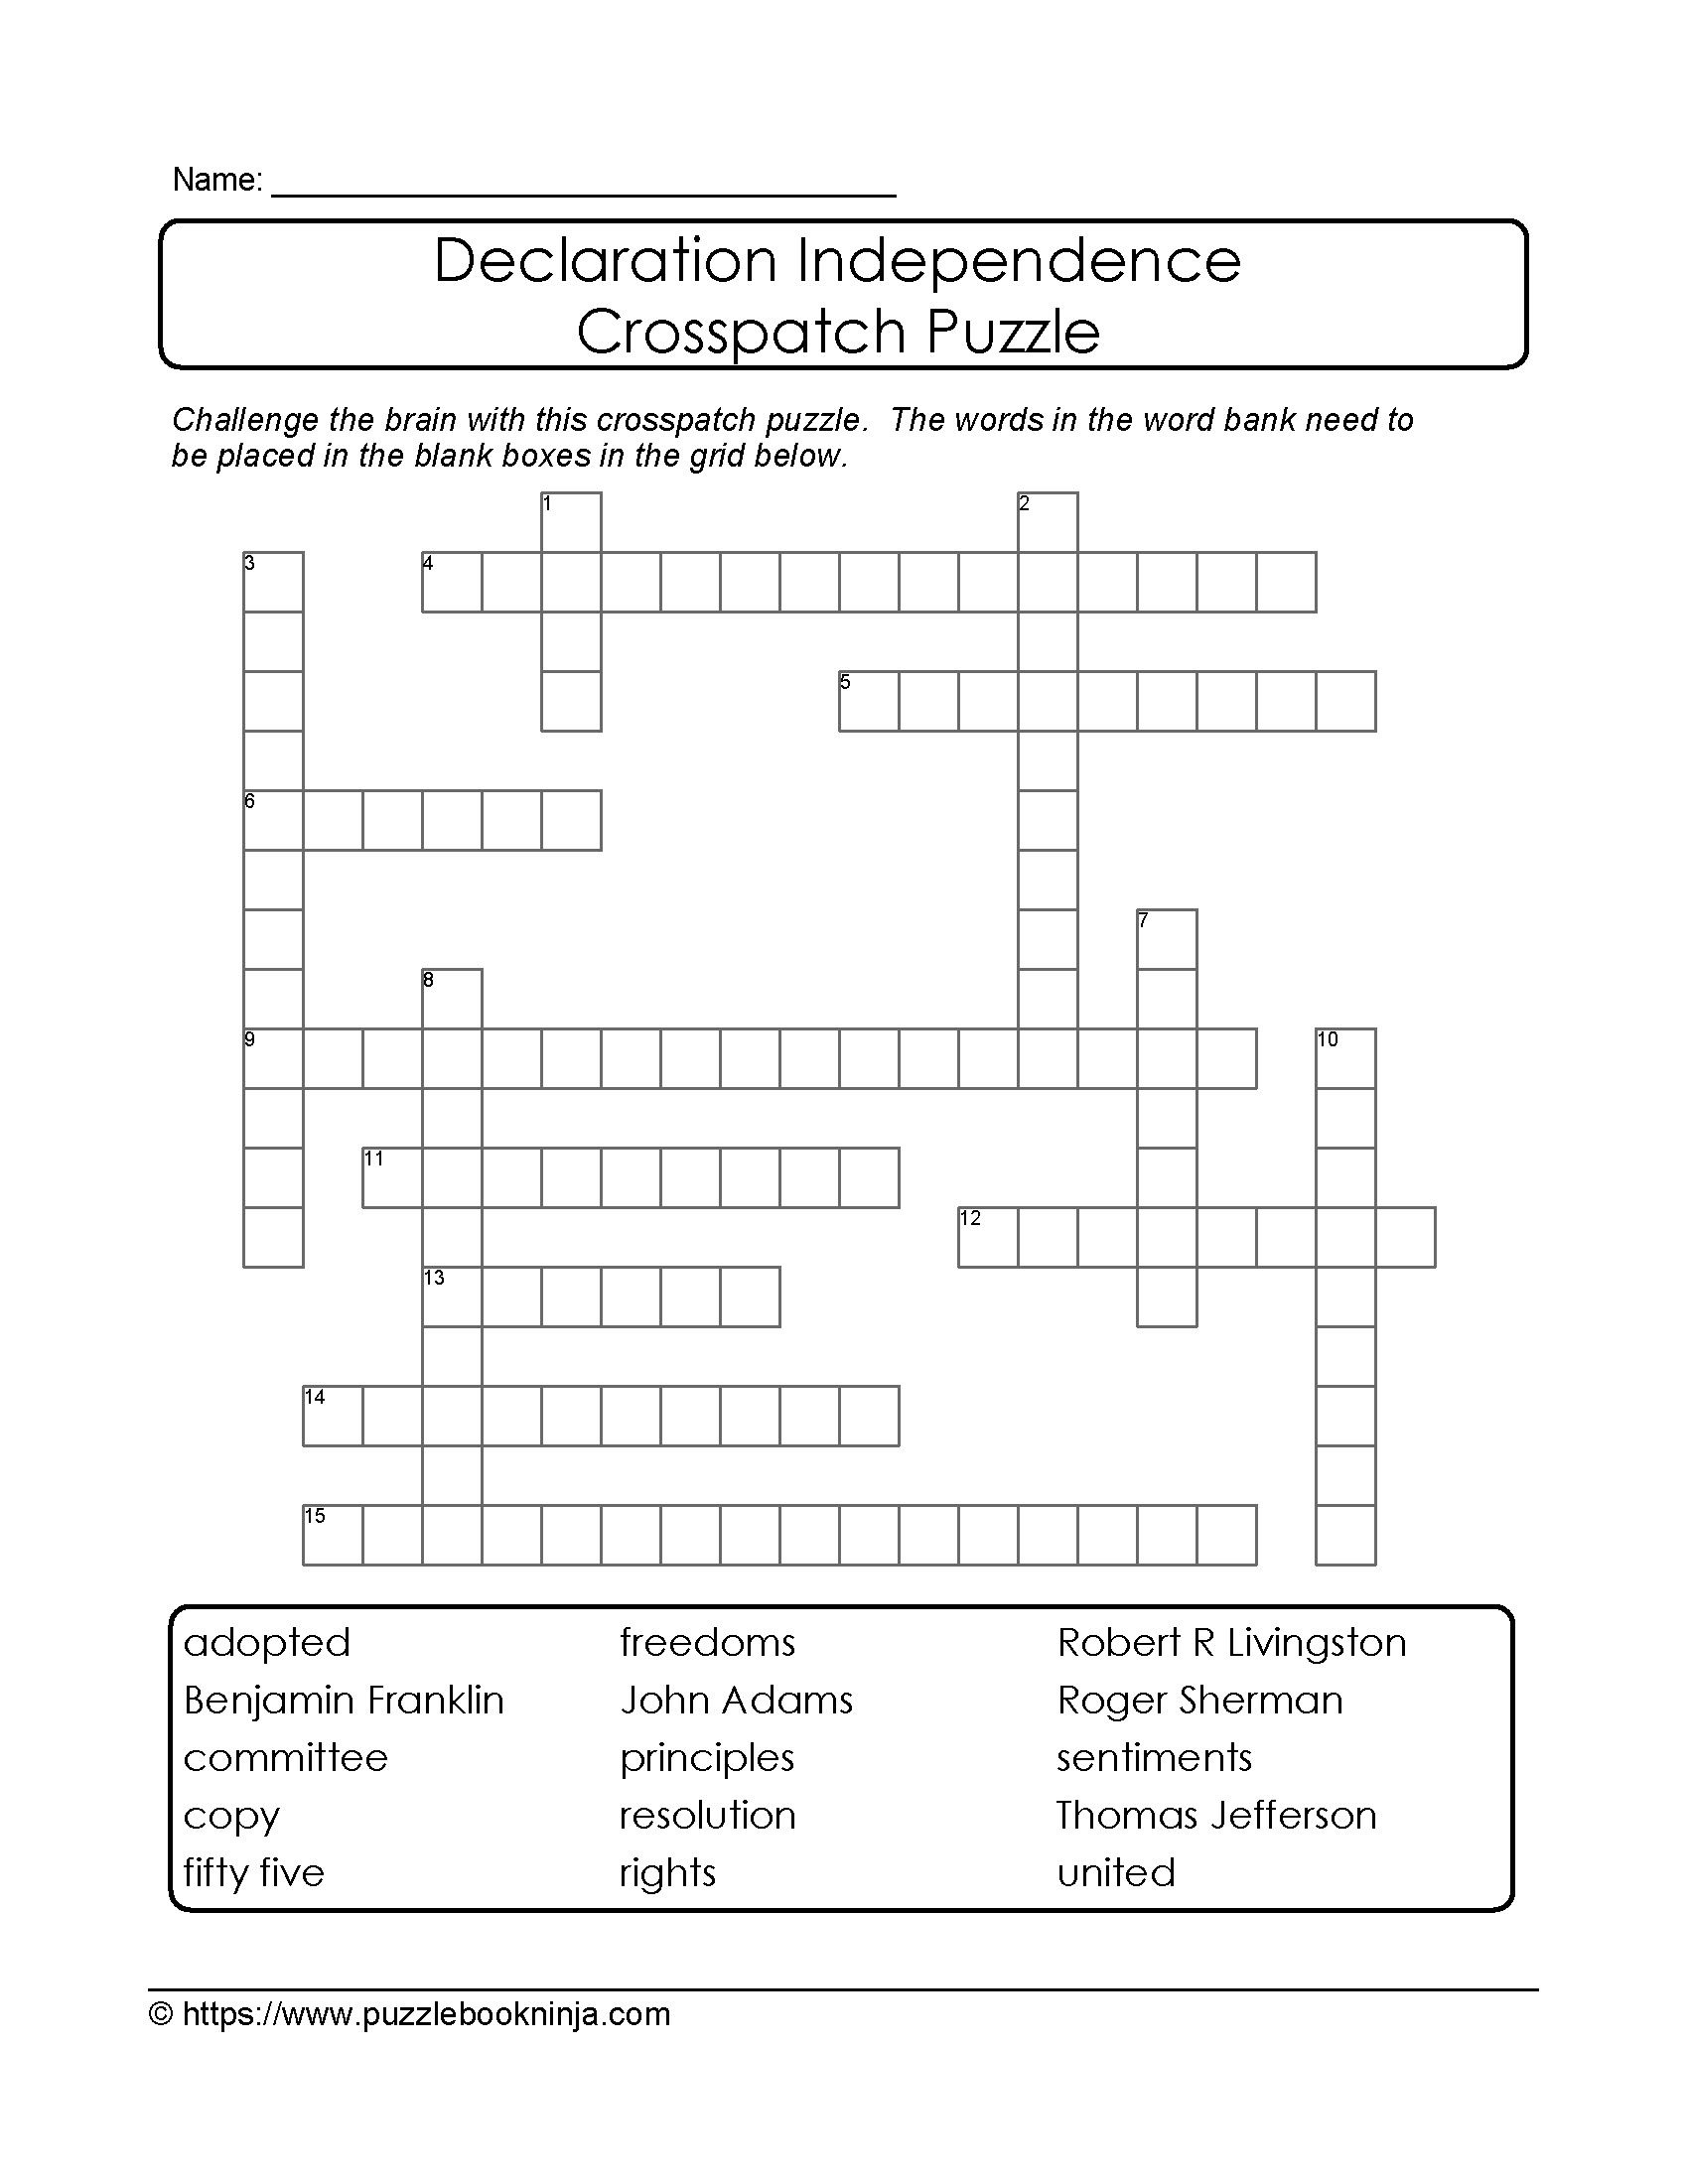 Crosspatch Puzzle To Print About Declaration Independence. | Puzzled - Printable Nfl Crossword Puzzles